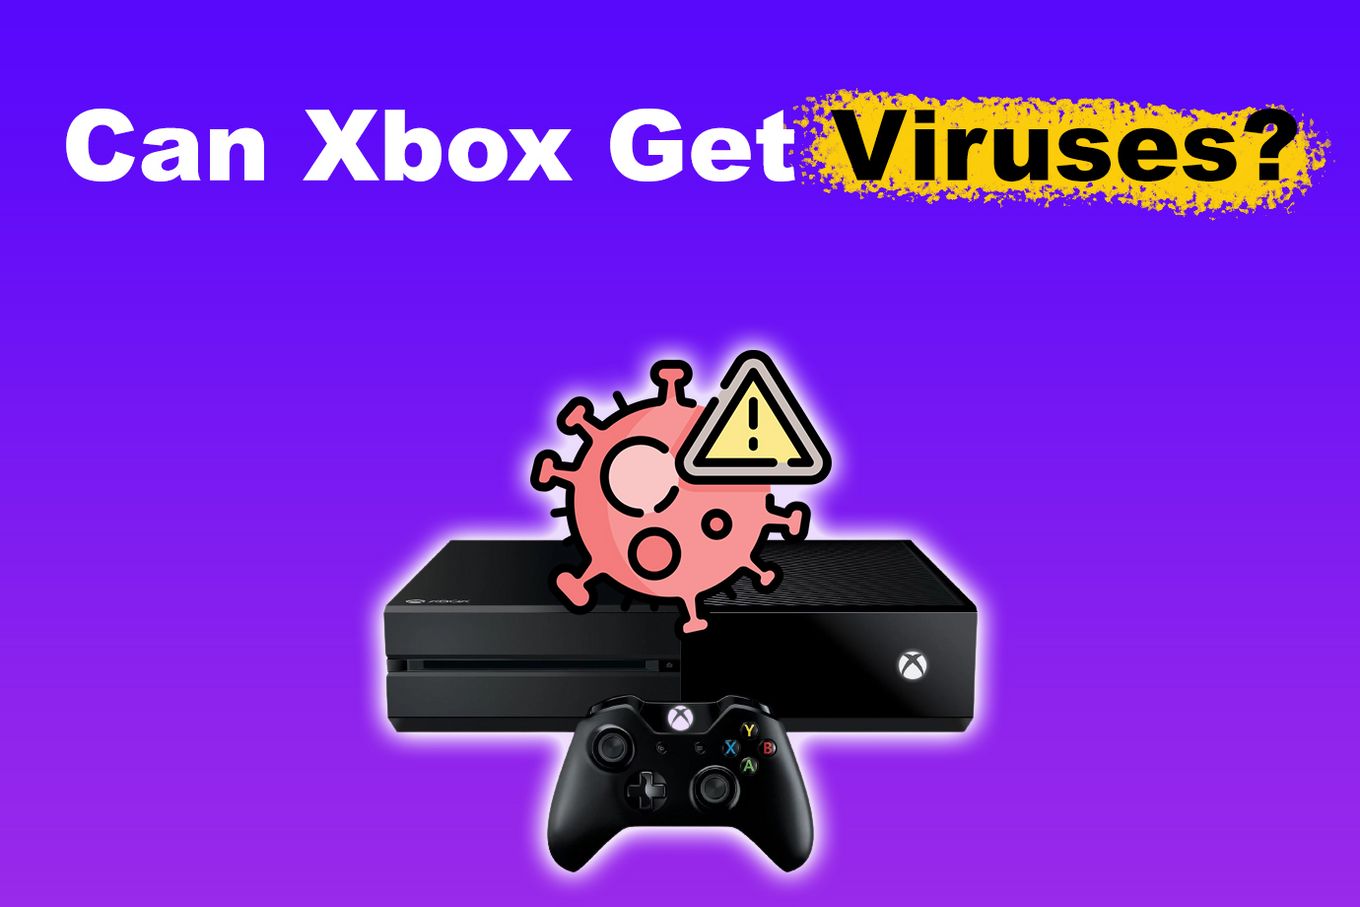 Can Xbox Get Viruses?